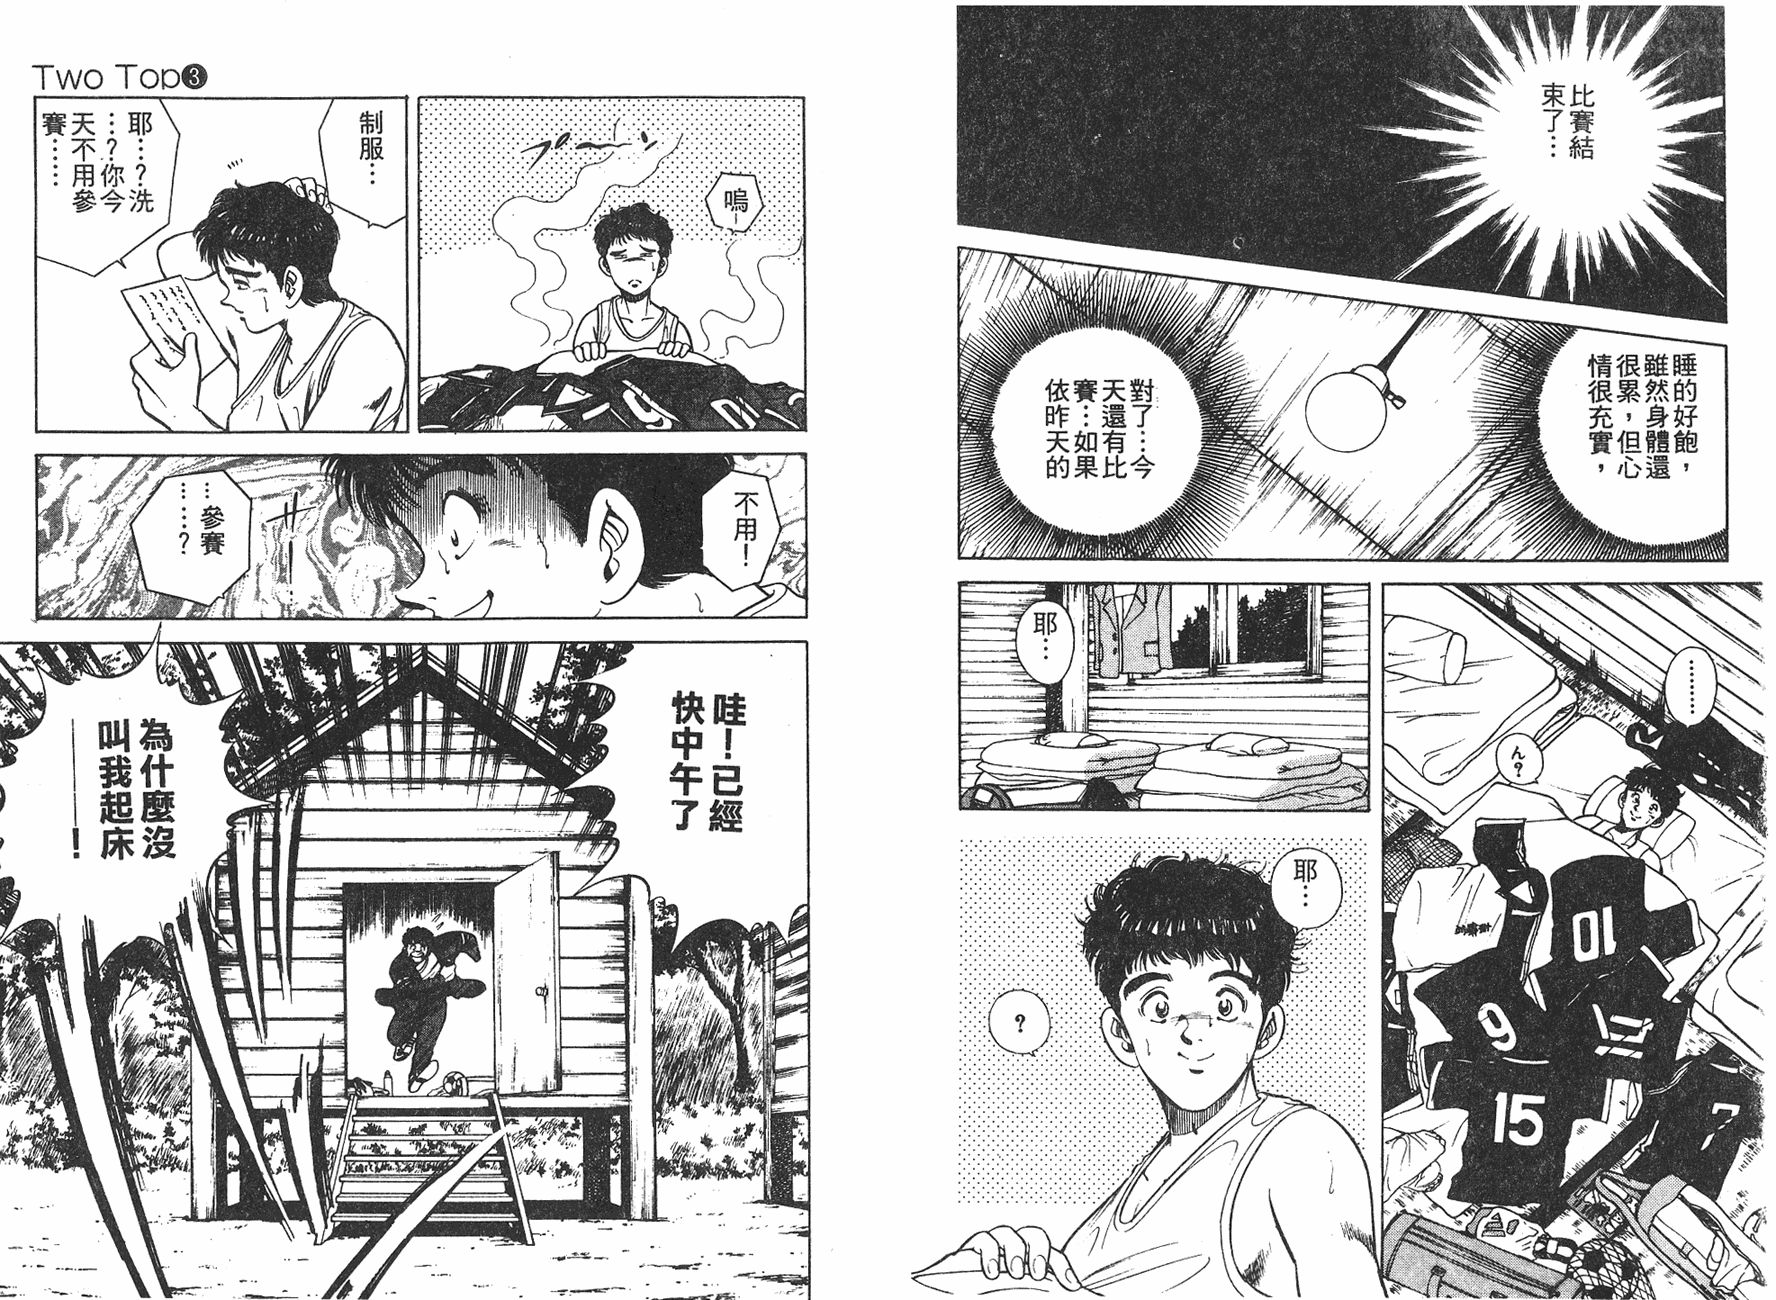 Two Top - 第03卷(1/2) - 8